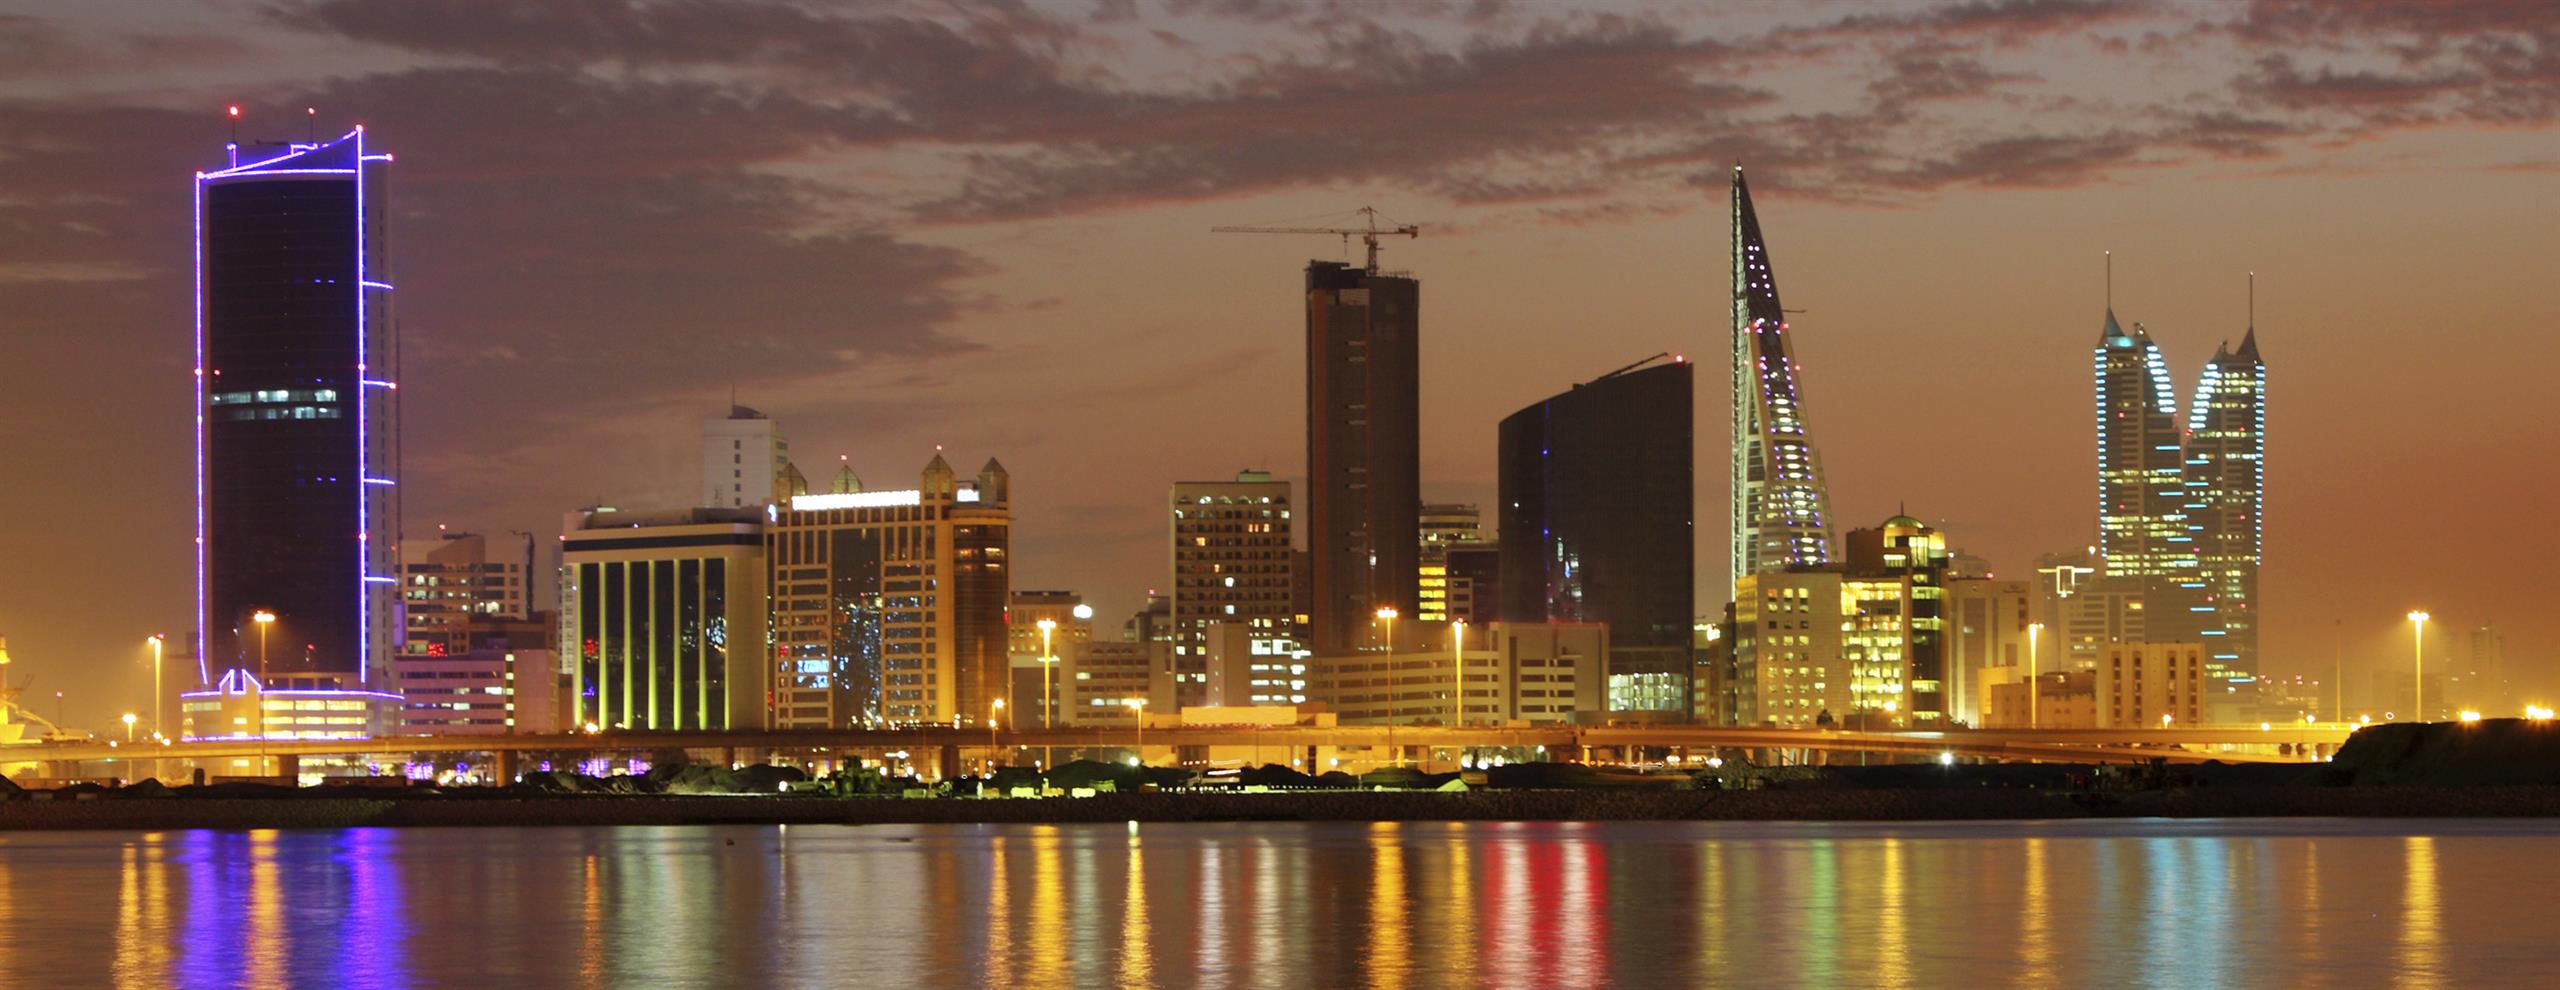 Skyline of Bahrain in the early evening